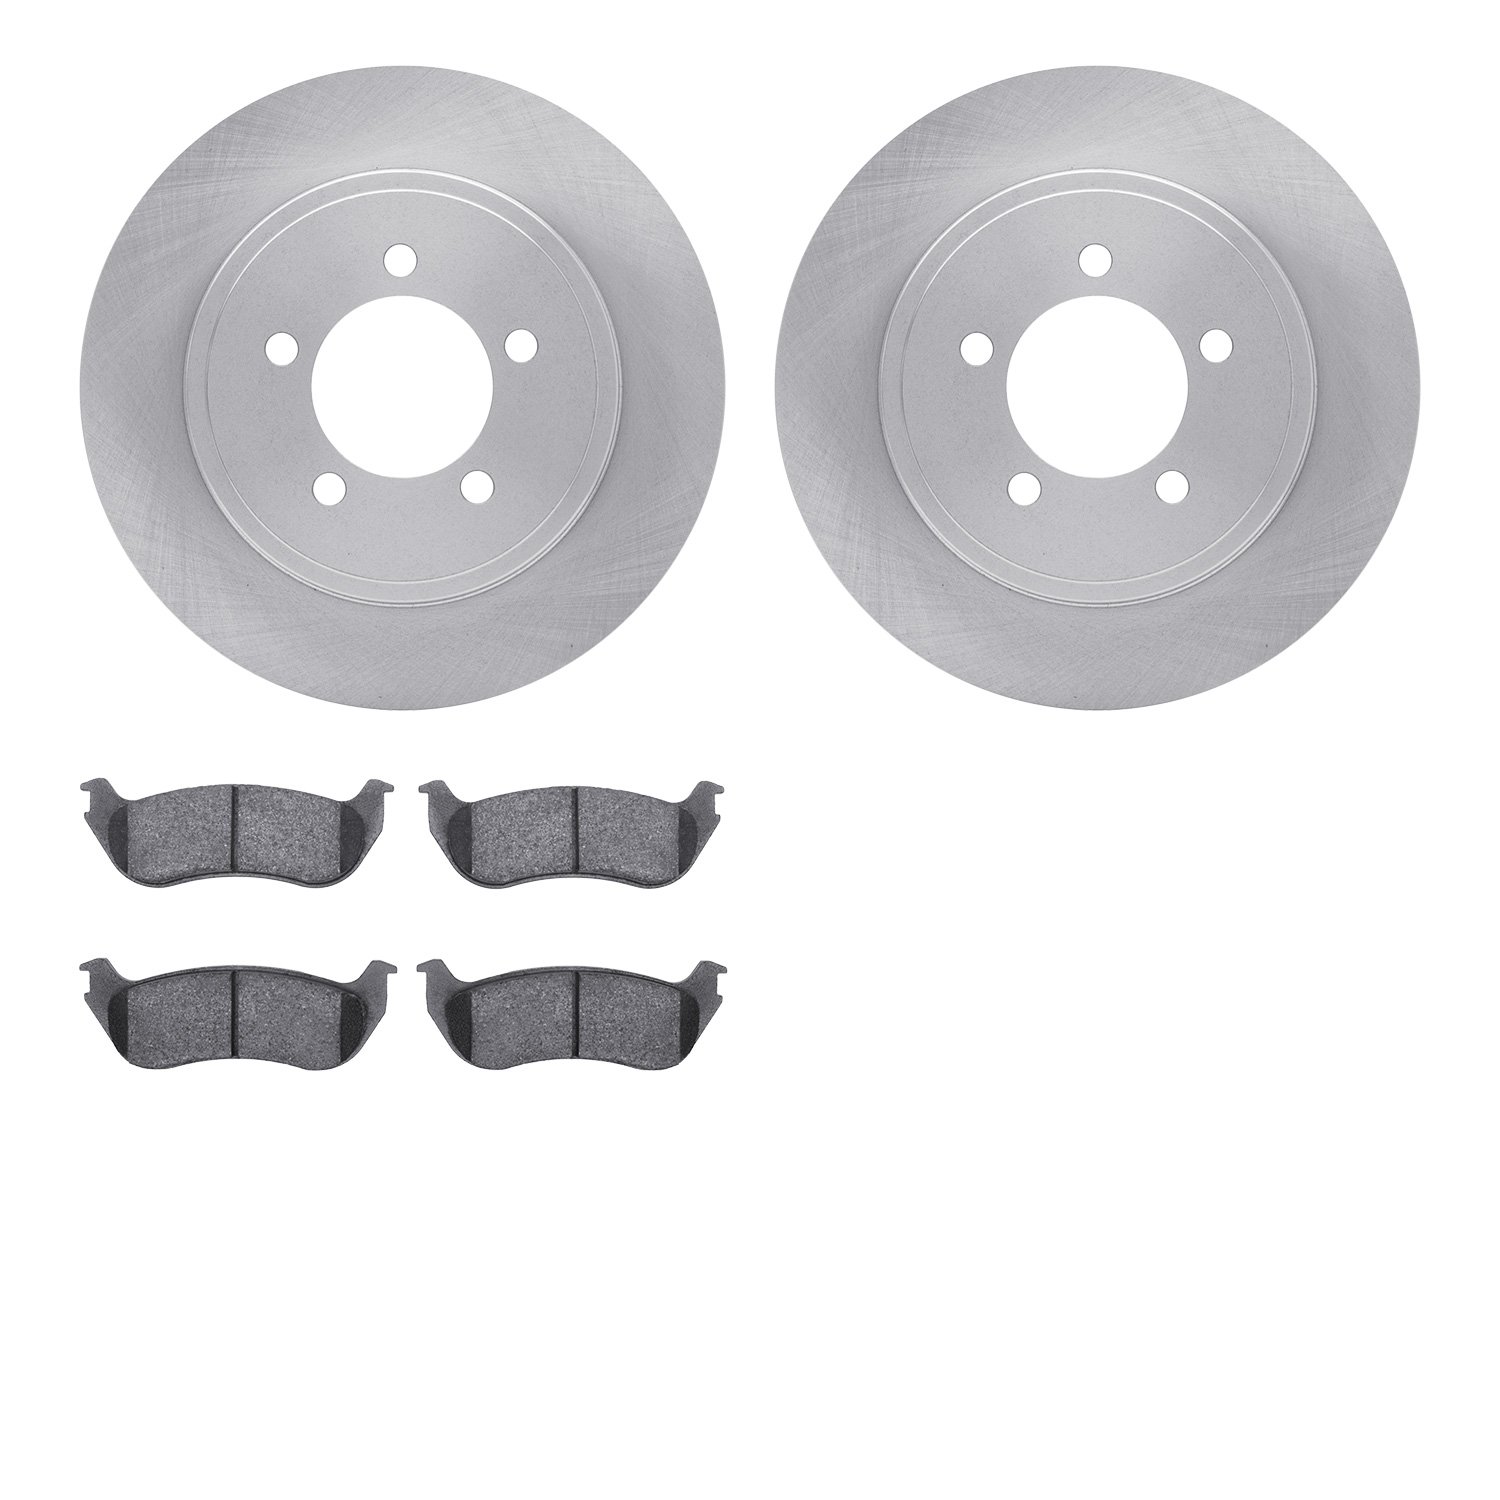 6402-54188 Brake Rotors with Ultimate-Duty Brake Pads, 2002-2005 Ford/Lincoln/Mercury/Mazda, Position: Rear